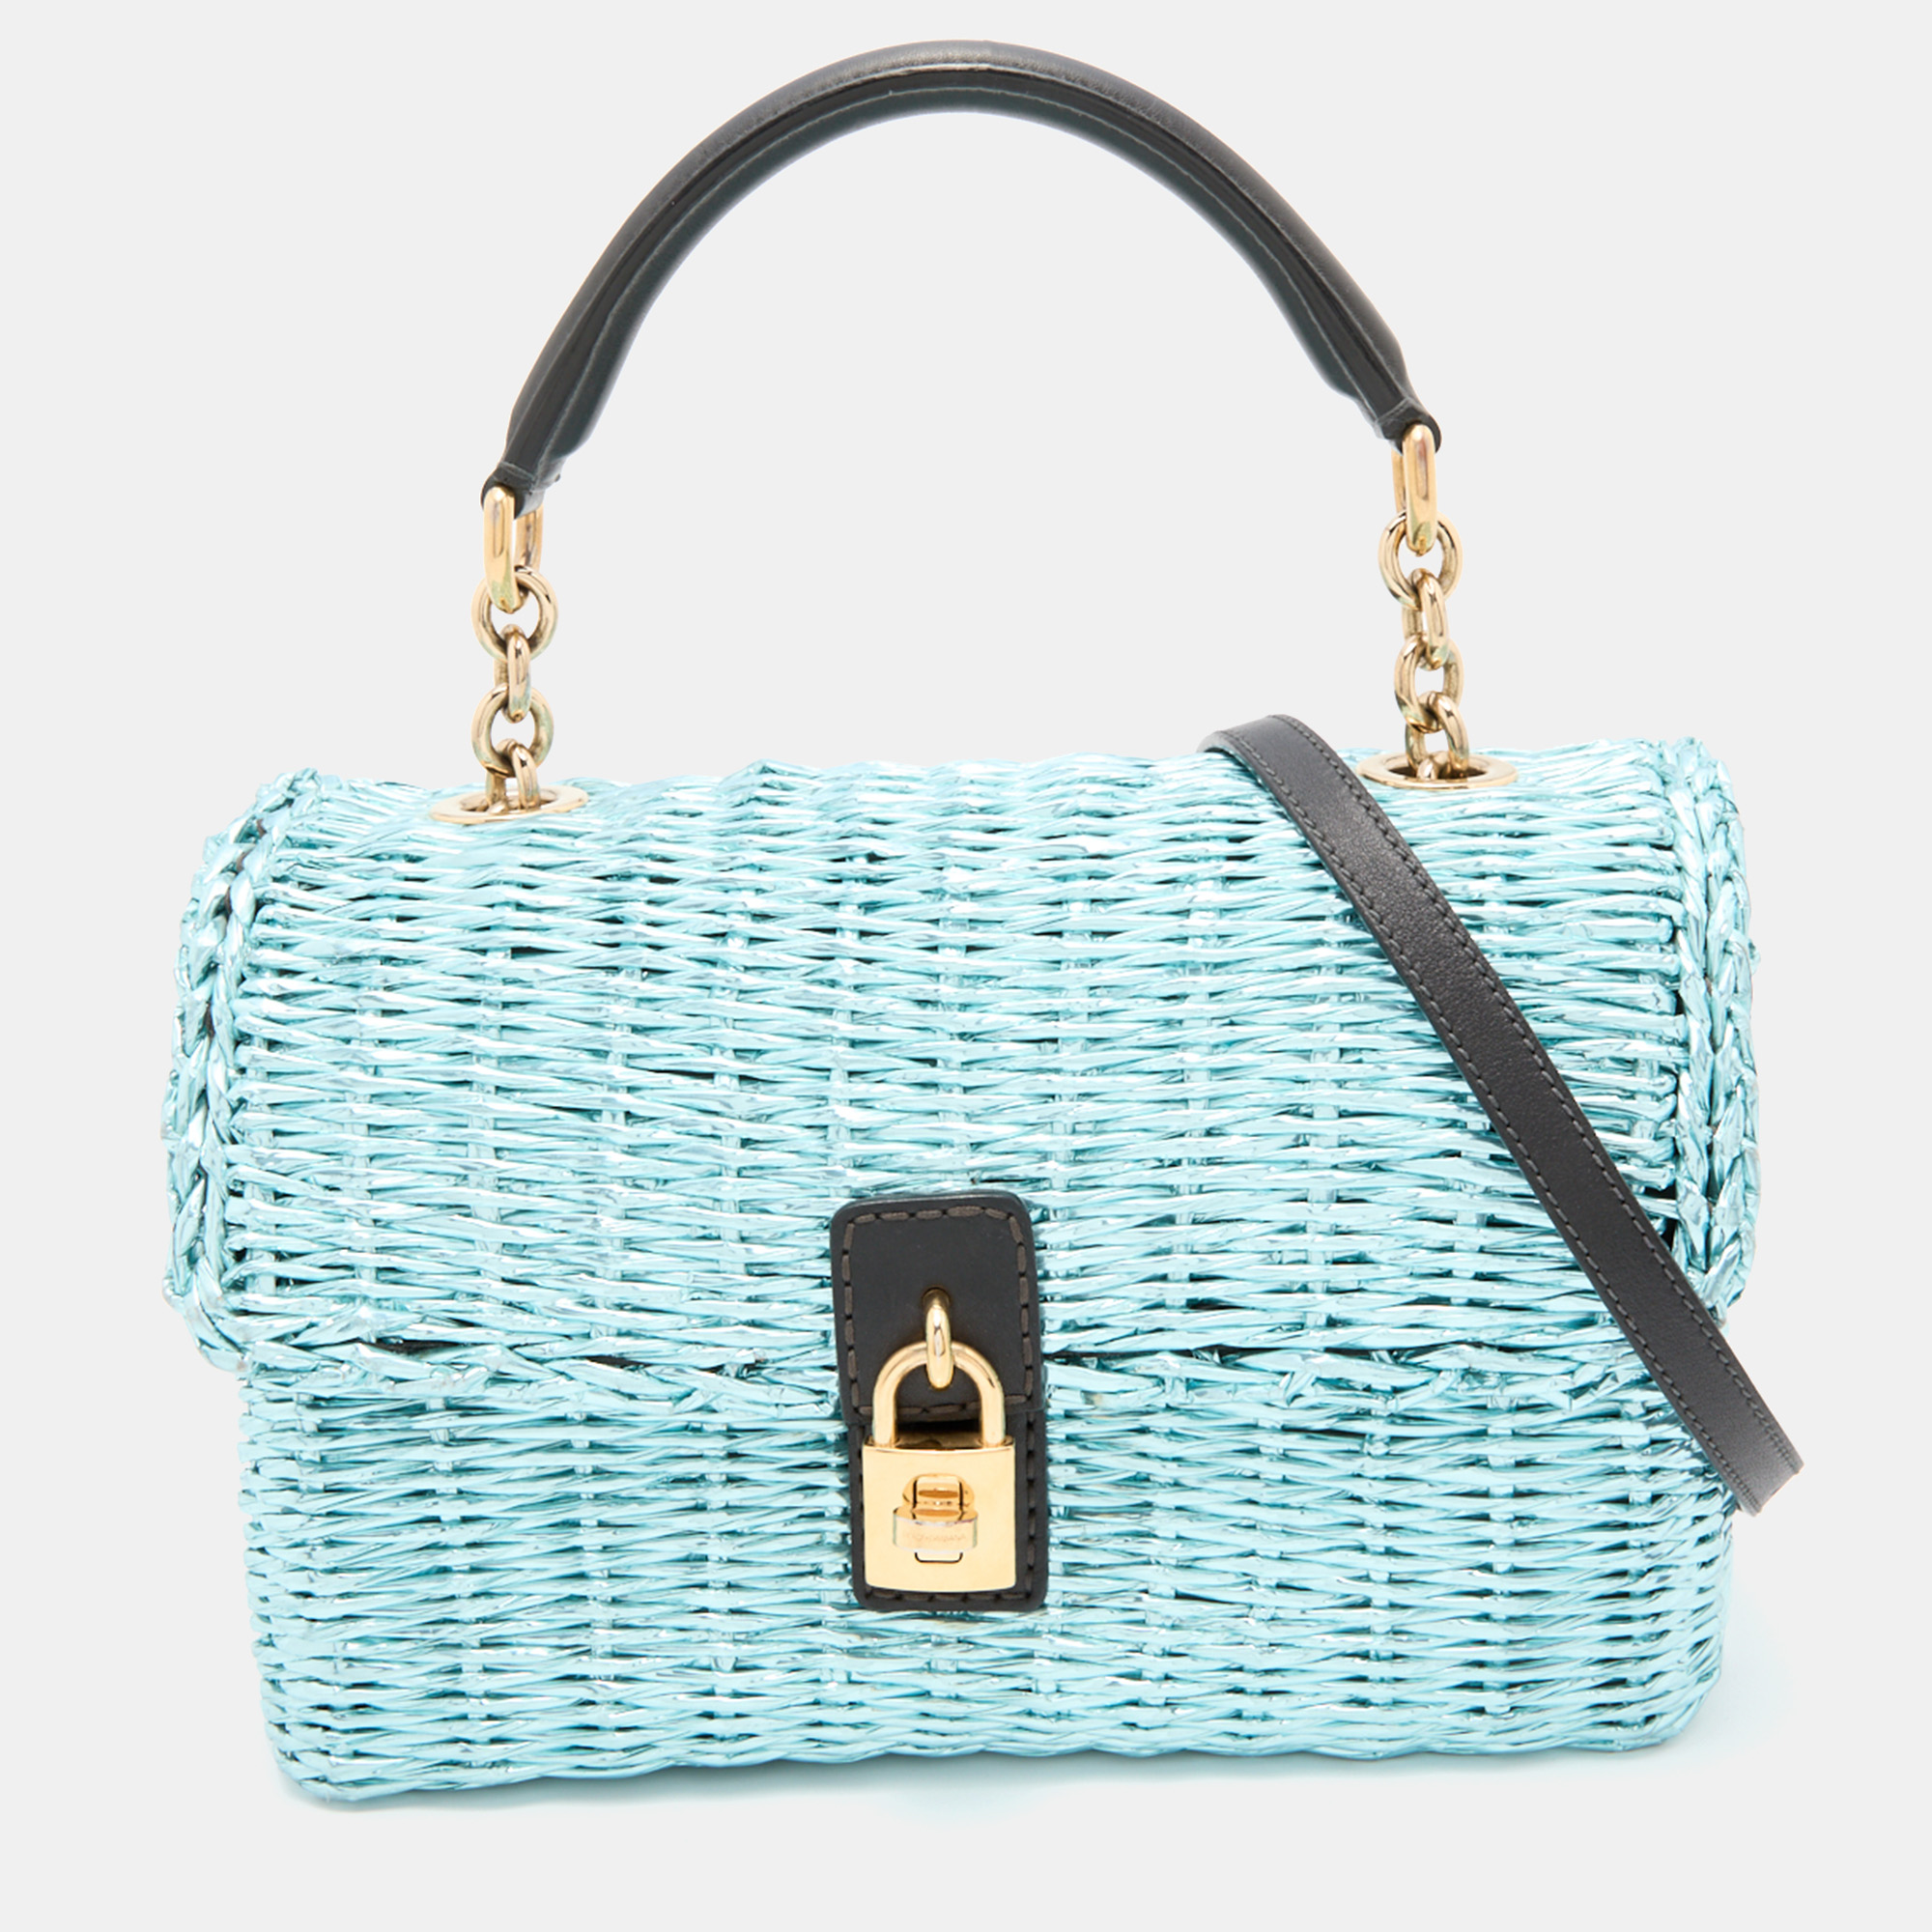 Pre-owned Dolce & Gabbana Metallic Blue/black Woven Straw And Leather Miss Dolce Top Handle Bag